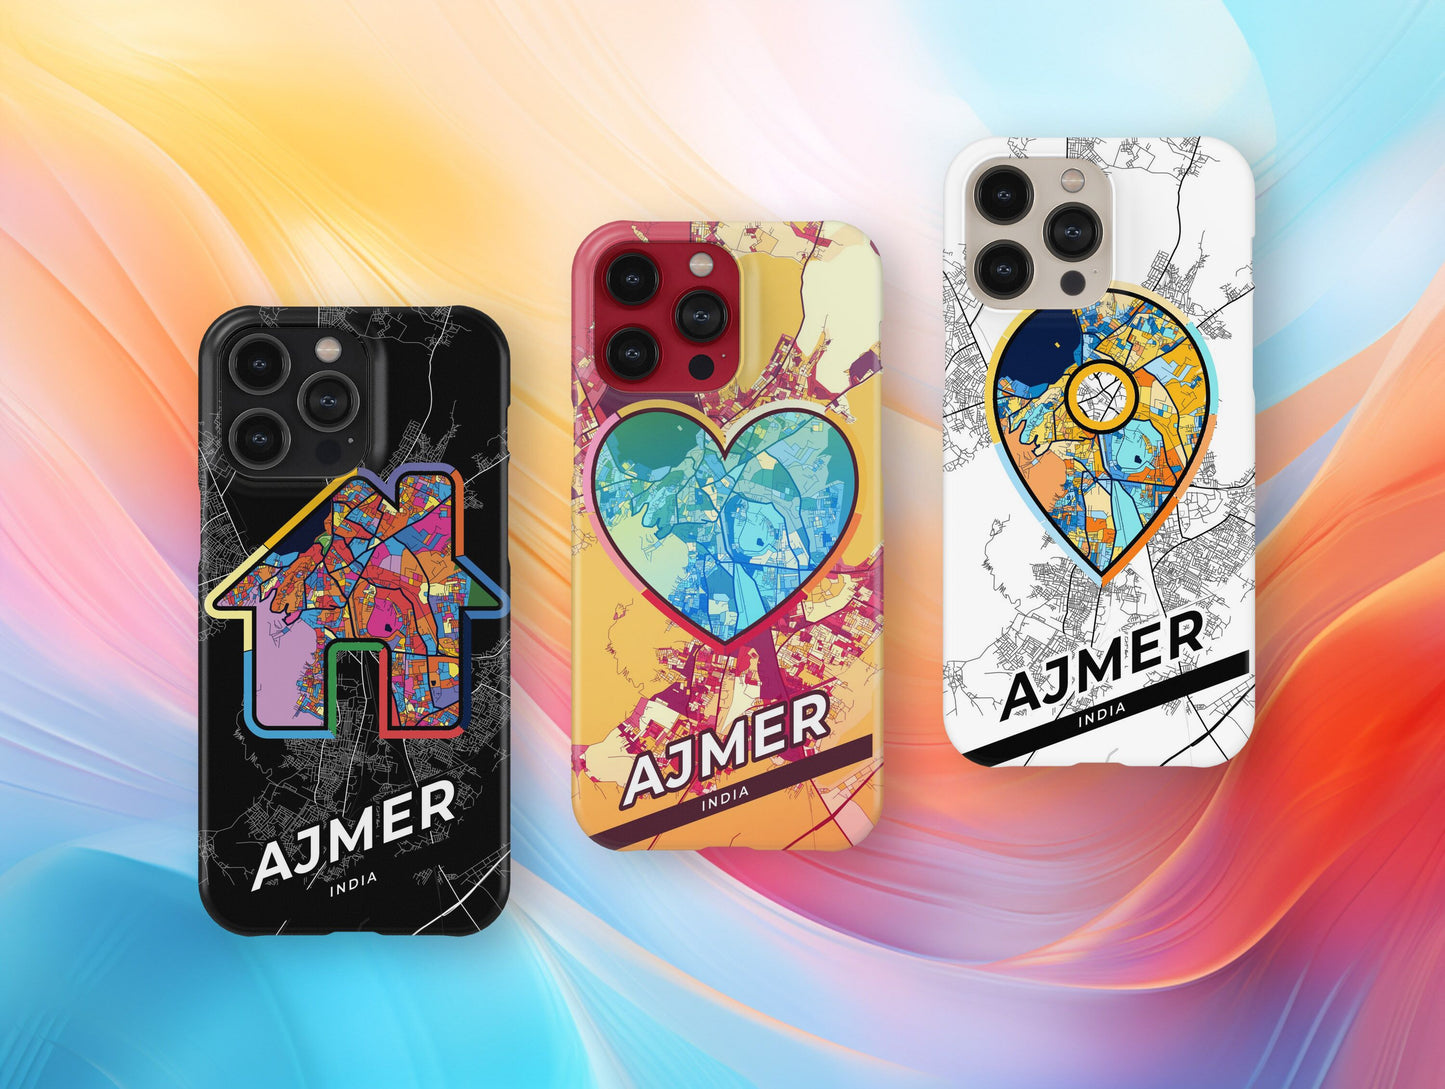 Ajmer India slim phone case with colorful icon. Birthday, wedding or housewarming gift. Couple match cases.